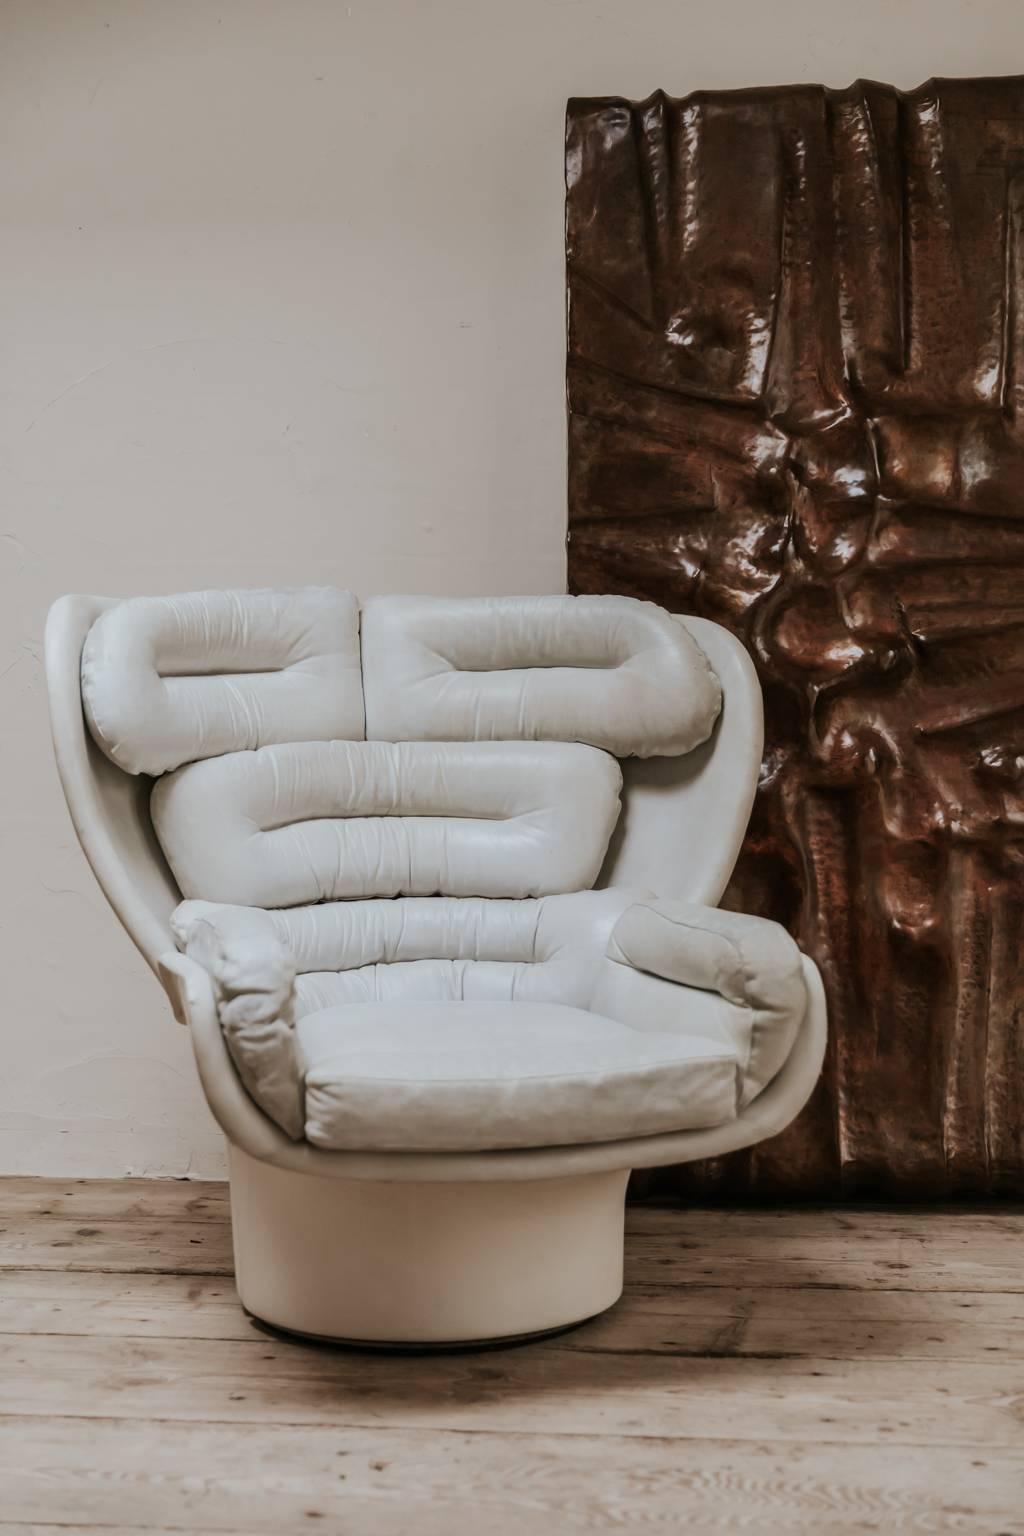 The Elda lounge chair was designed in 1963 and is made of a fiberglass shell with a rotating base, the seat is padded with white leather covering. The iconic piece, designed by Joe Colombo was very futuristic in design for the time it was produced.